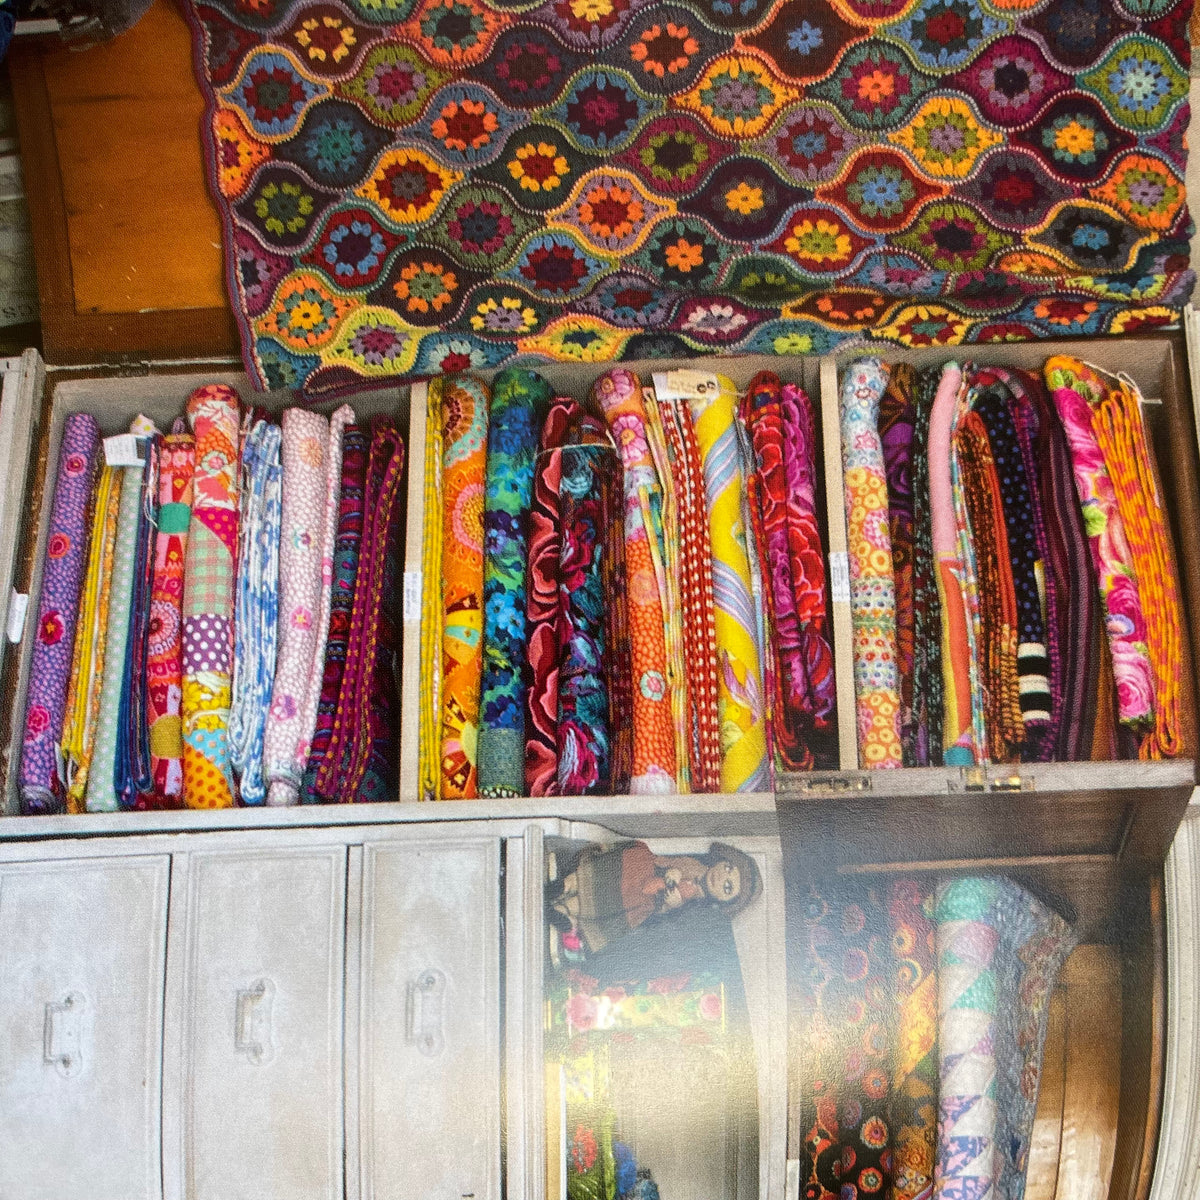 Kaffe Fassett in the Studio: Behind the Scenes with a Master